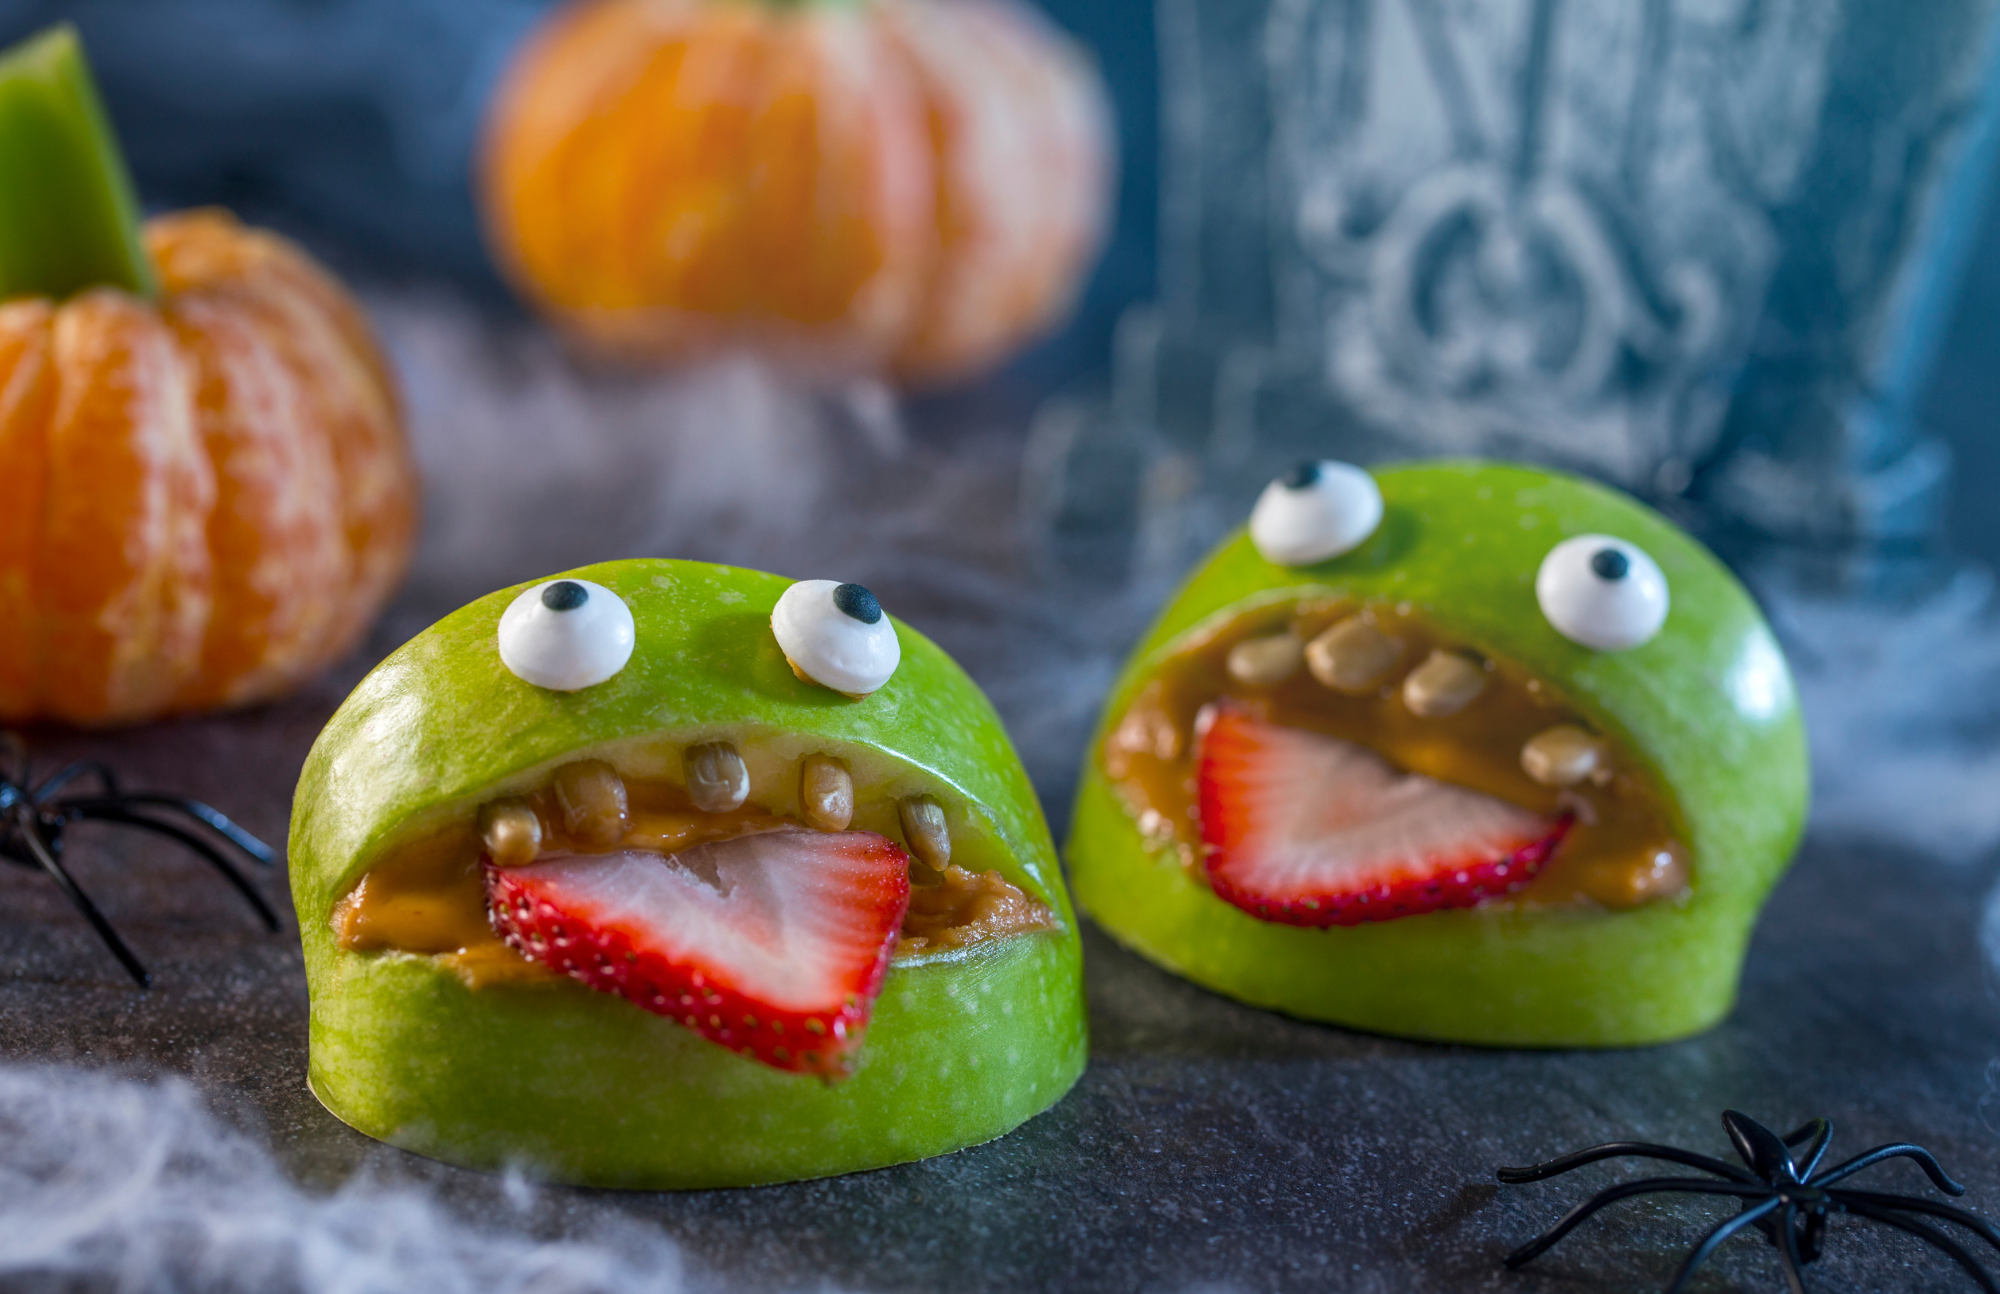 a monster face made from apples, peanut butter, strawberries, and candy eyes